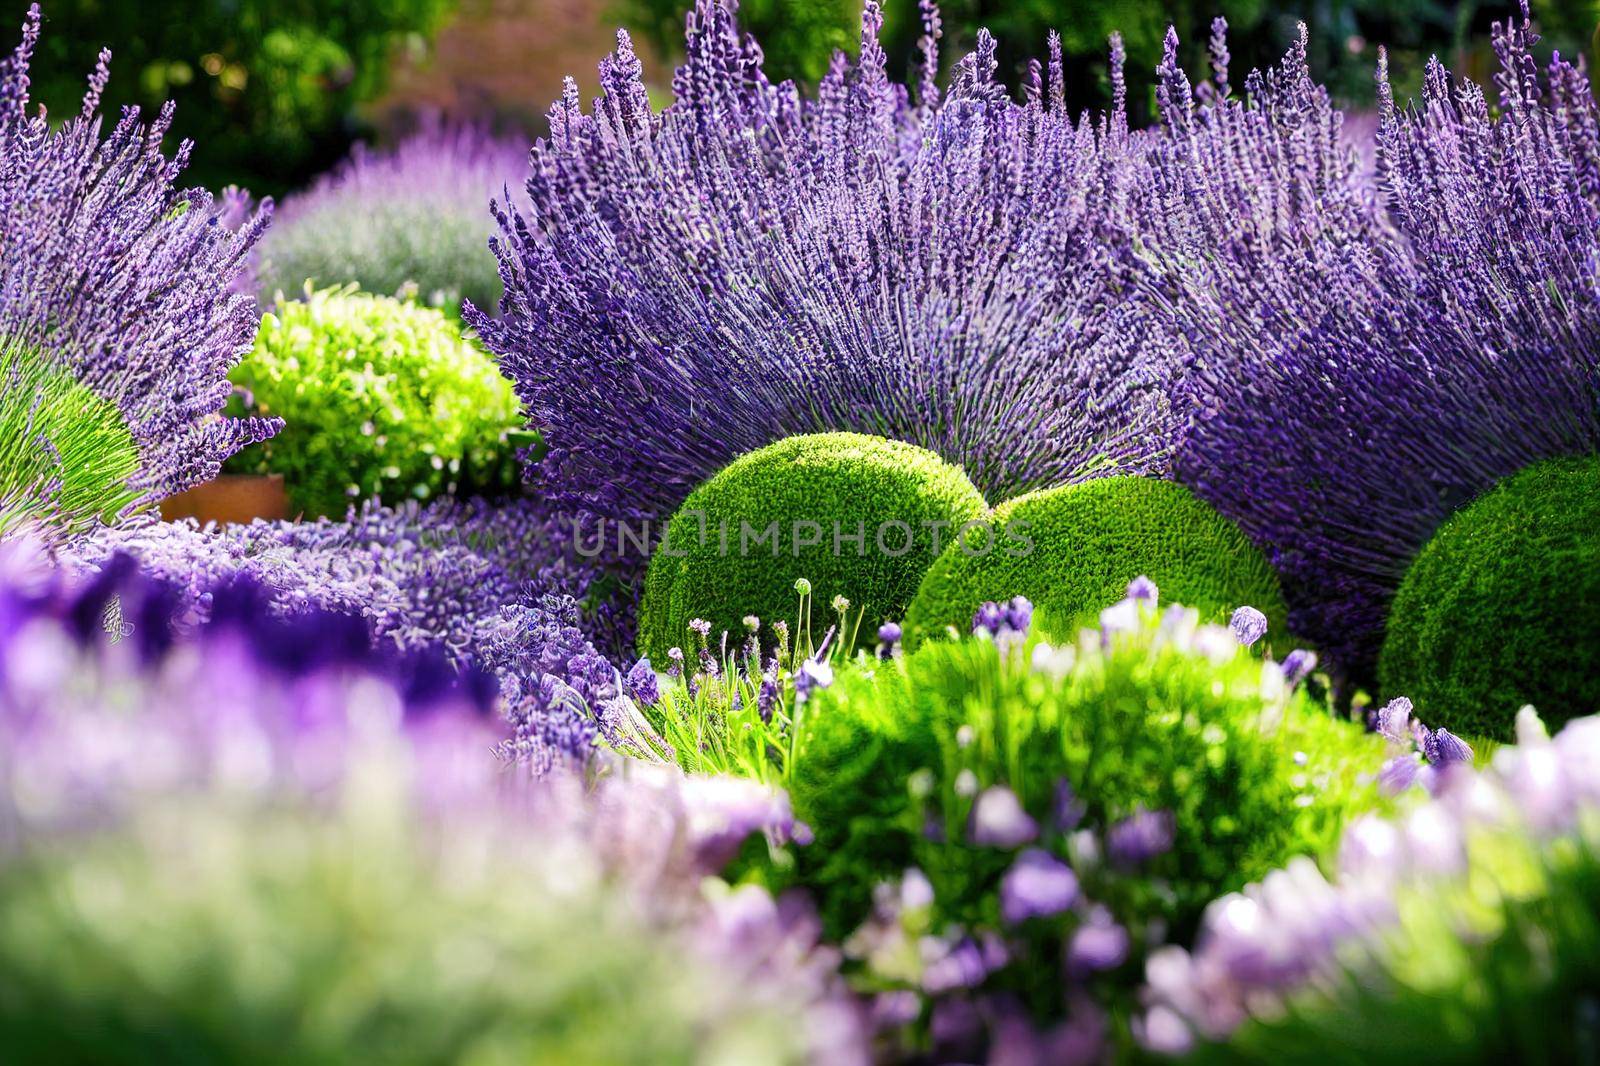 Lavender garden, flower bed in bloom, soft focus, late summer garden with purple lavender, calamint, wormwood, sage, globe thistle and verbena blooming next to a path , ornamental plants concept